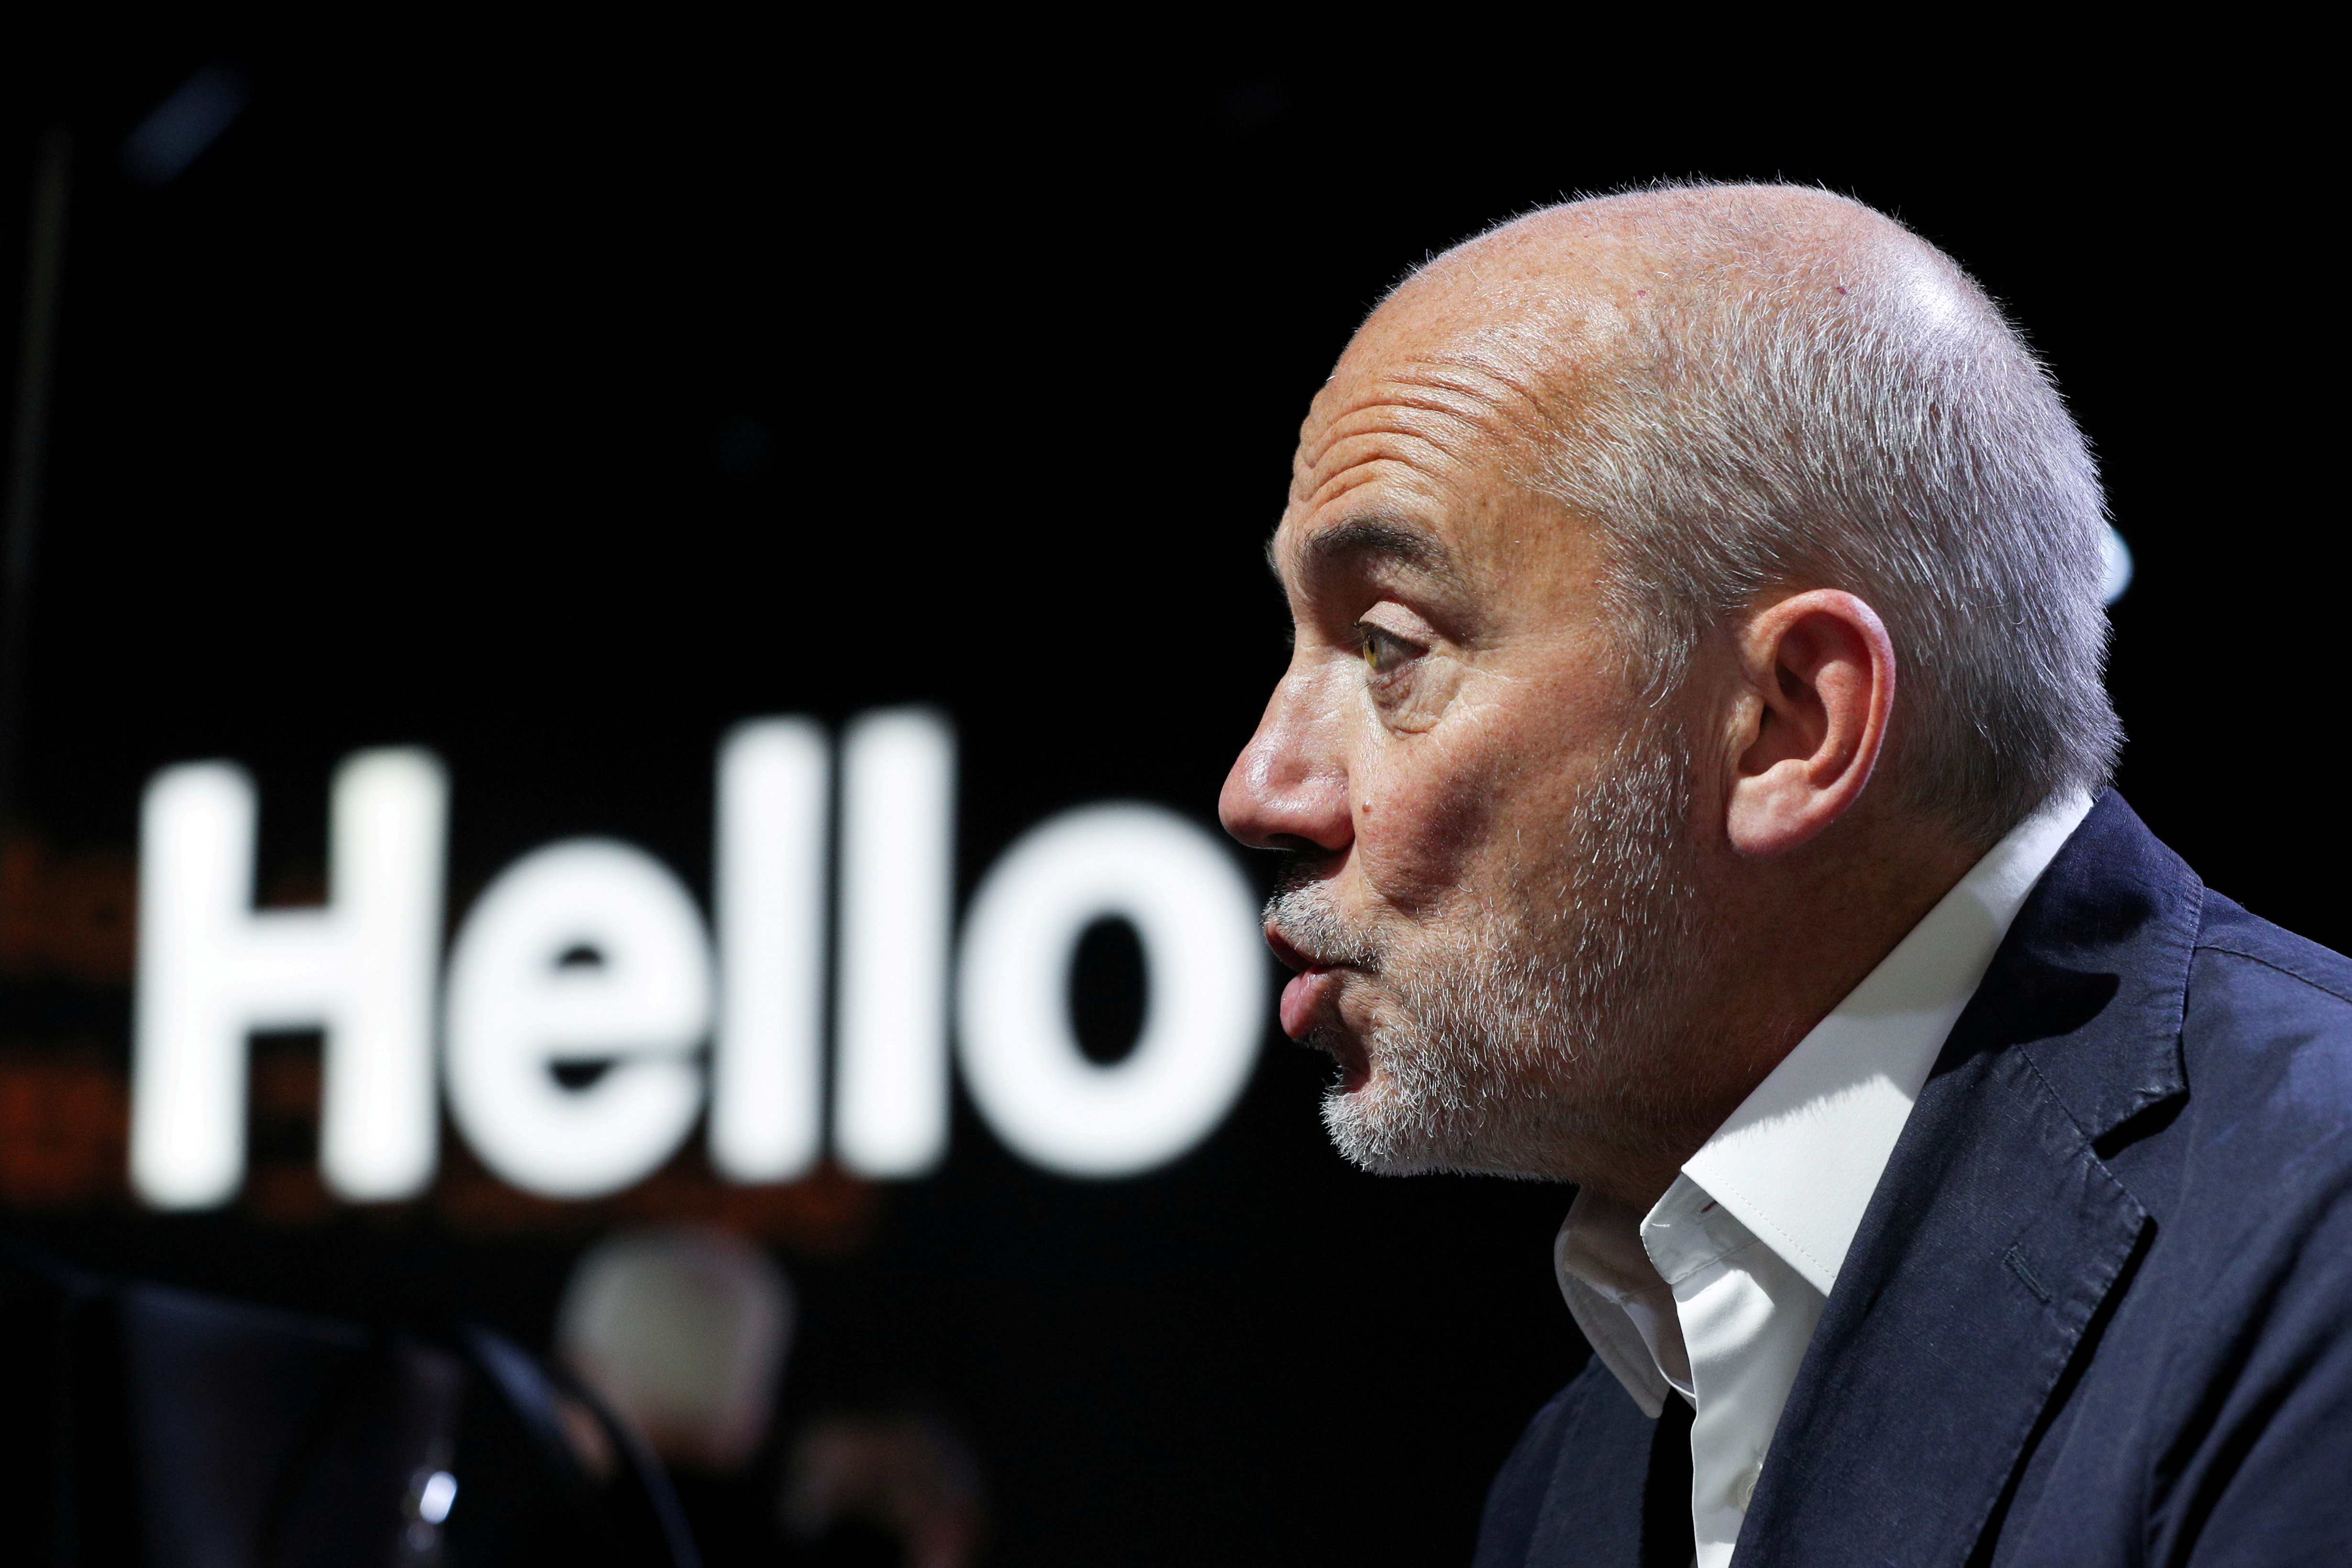 Chairman & CEO of Orange Stephane Richard speaks during an interview at the Mobile World Congress (MWC) in Barcelona, Spain, June 29, 2021. REUTERS/Albert Gea/File Photo